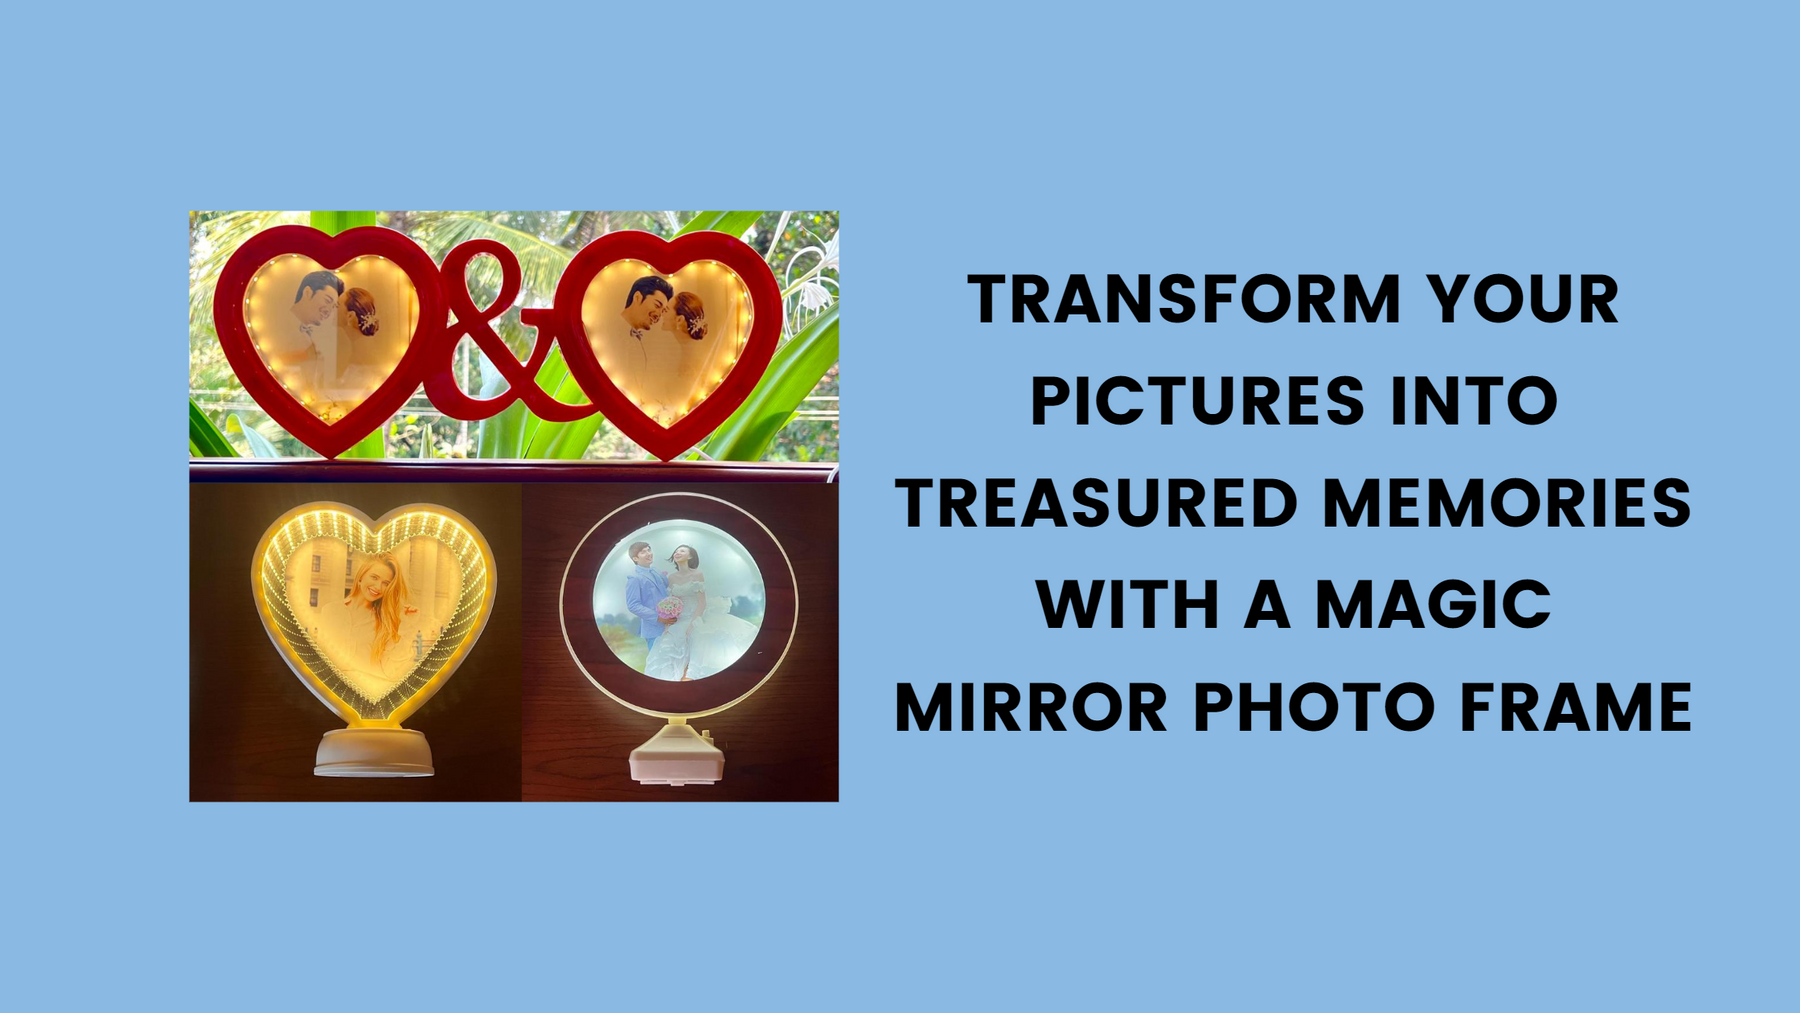 Transform Your Pictures Into Treasured Memories With a Magic Mirror Photo Frame